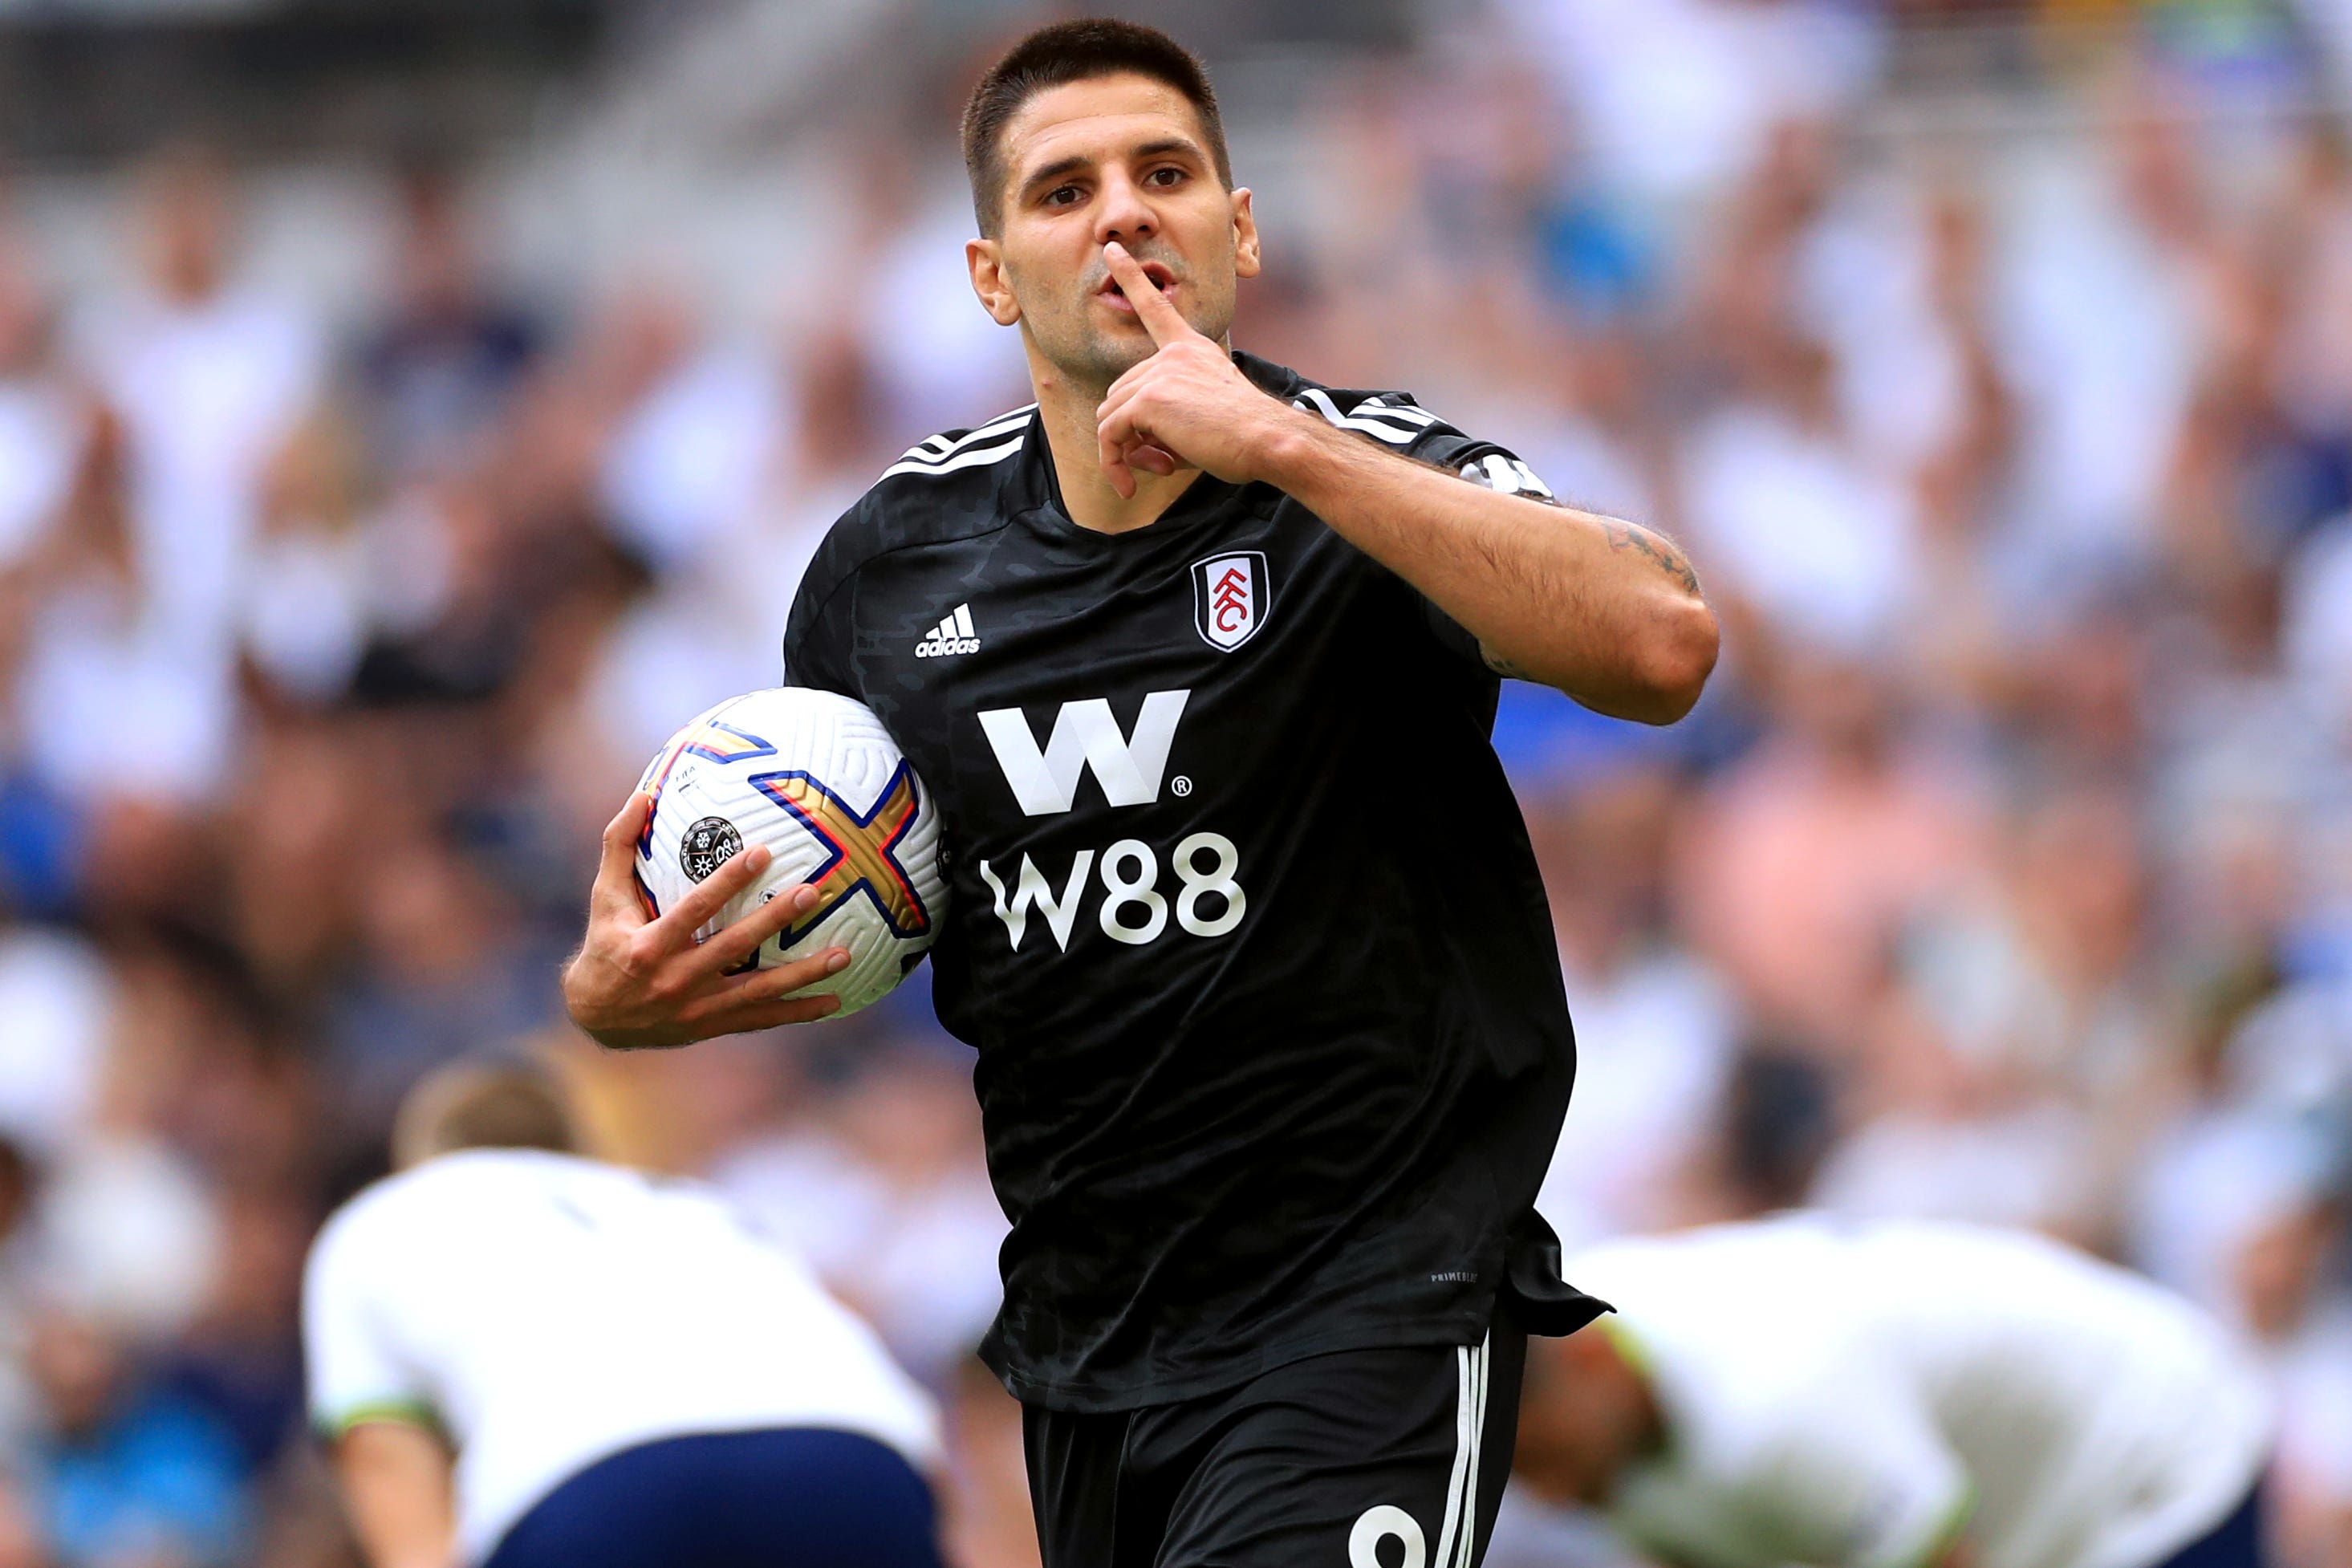 Marco Silva insisted Aleksandar Mitrovic does not need the added motivation of playing against his former club Newcastle on Saturday to perform (Bradley Collyer/PA)